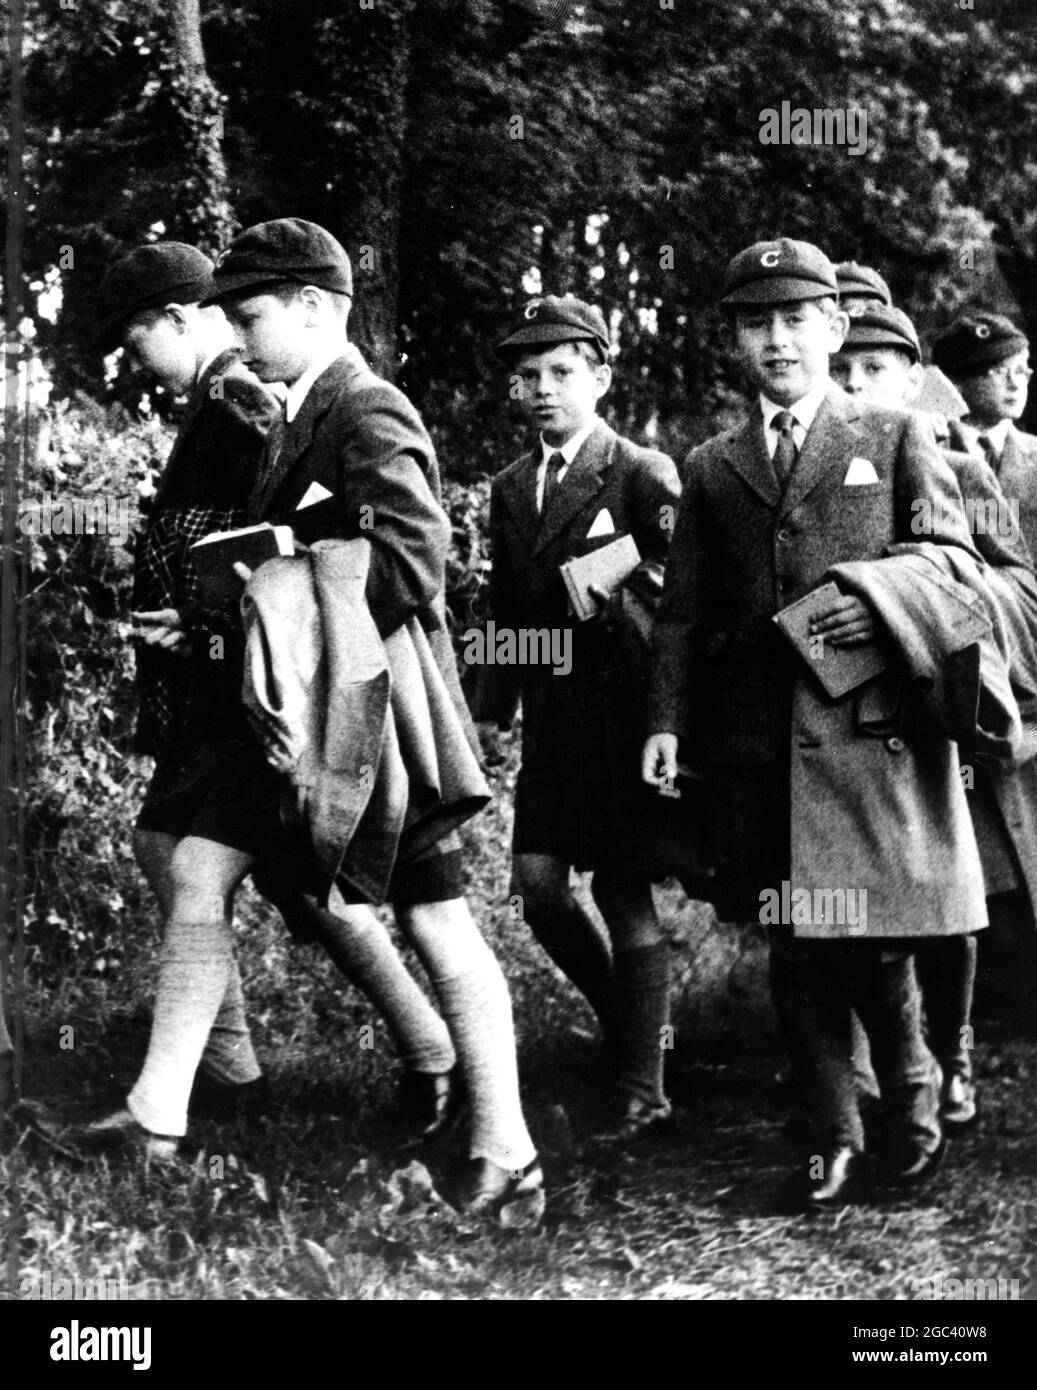 First Public Appearance as Prince of Wales. Prince Charles (right) walking back from St Peter's Church Headley on Sunday to Cheam School making his first appearance as The Prince of Wales, announced by the Queen in a recorded message at the end of the Empire Games at Cardiff. 28 July 1958 Stock Photo